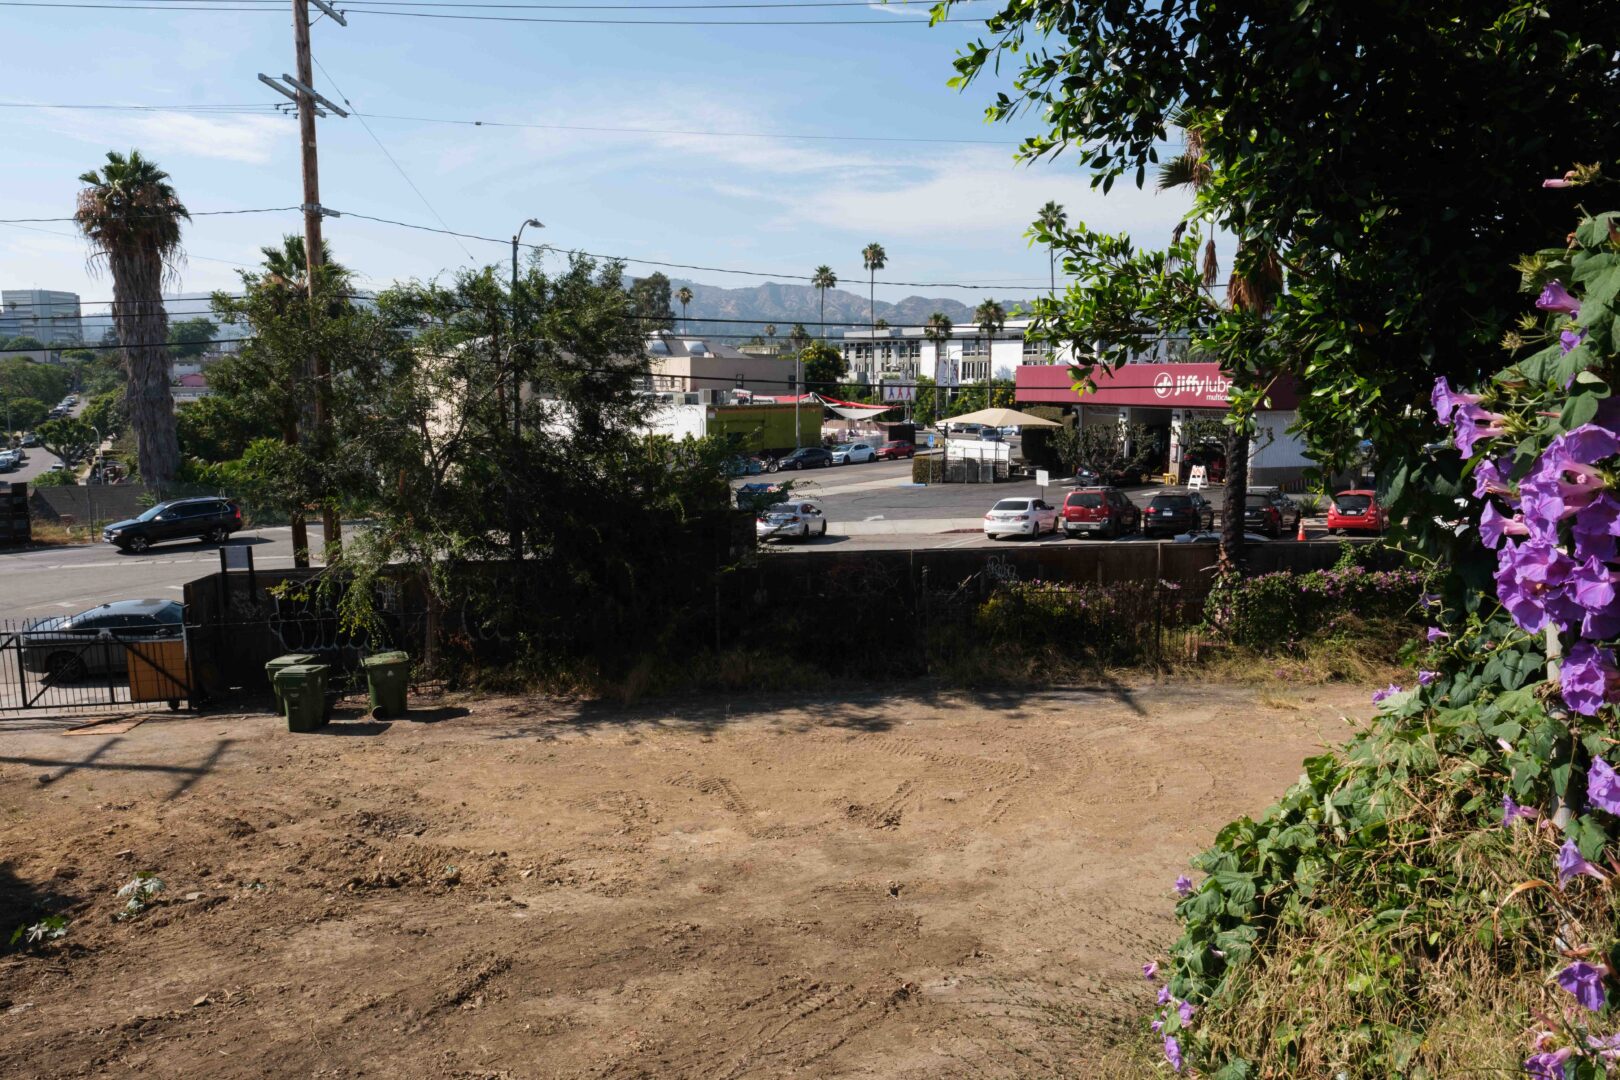 Adjacent to AgLago, an empty lot sits where previously, historical buildings were demolished by Frost/Chaddock Developers, LLC. July 2023.